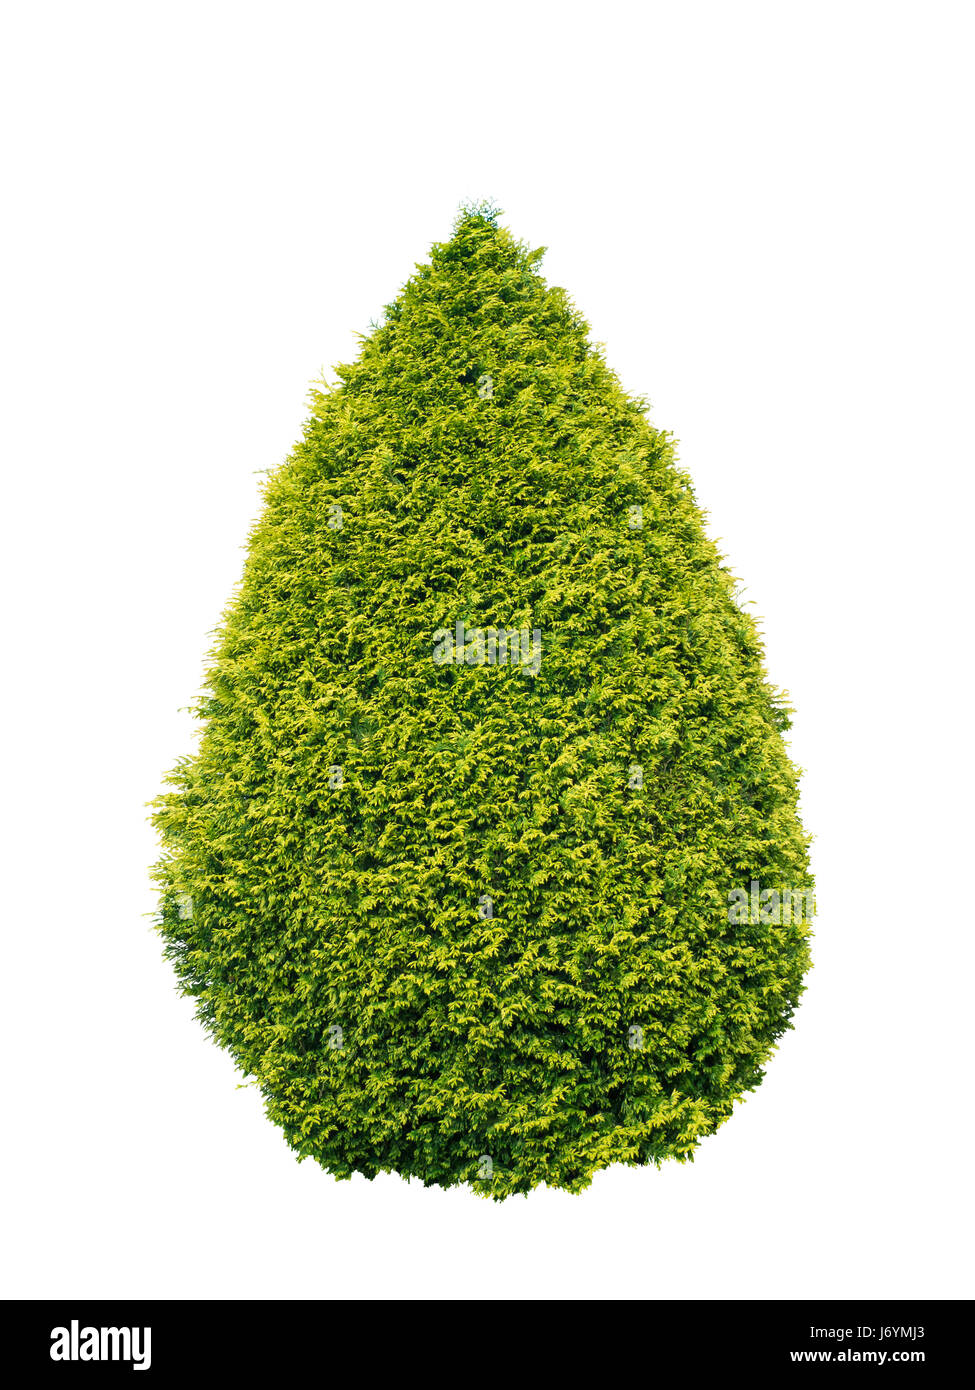 Lush green and yellow thuja conical shrub isolated on white Stock Photo